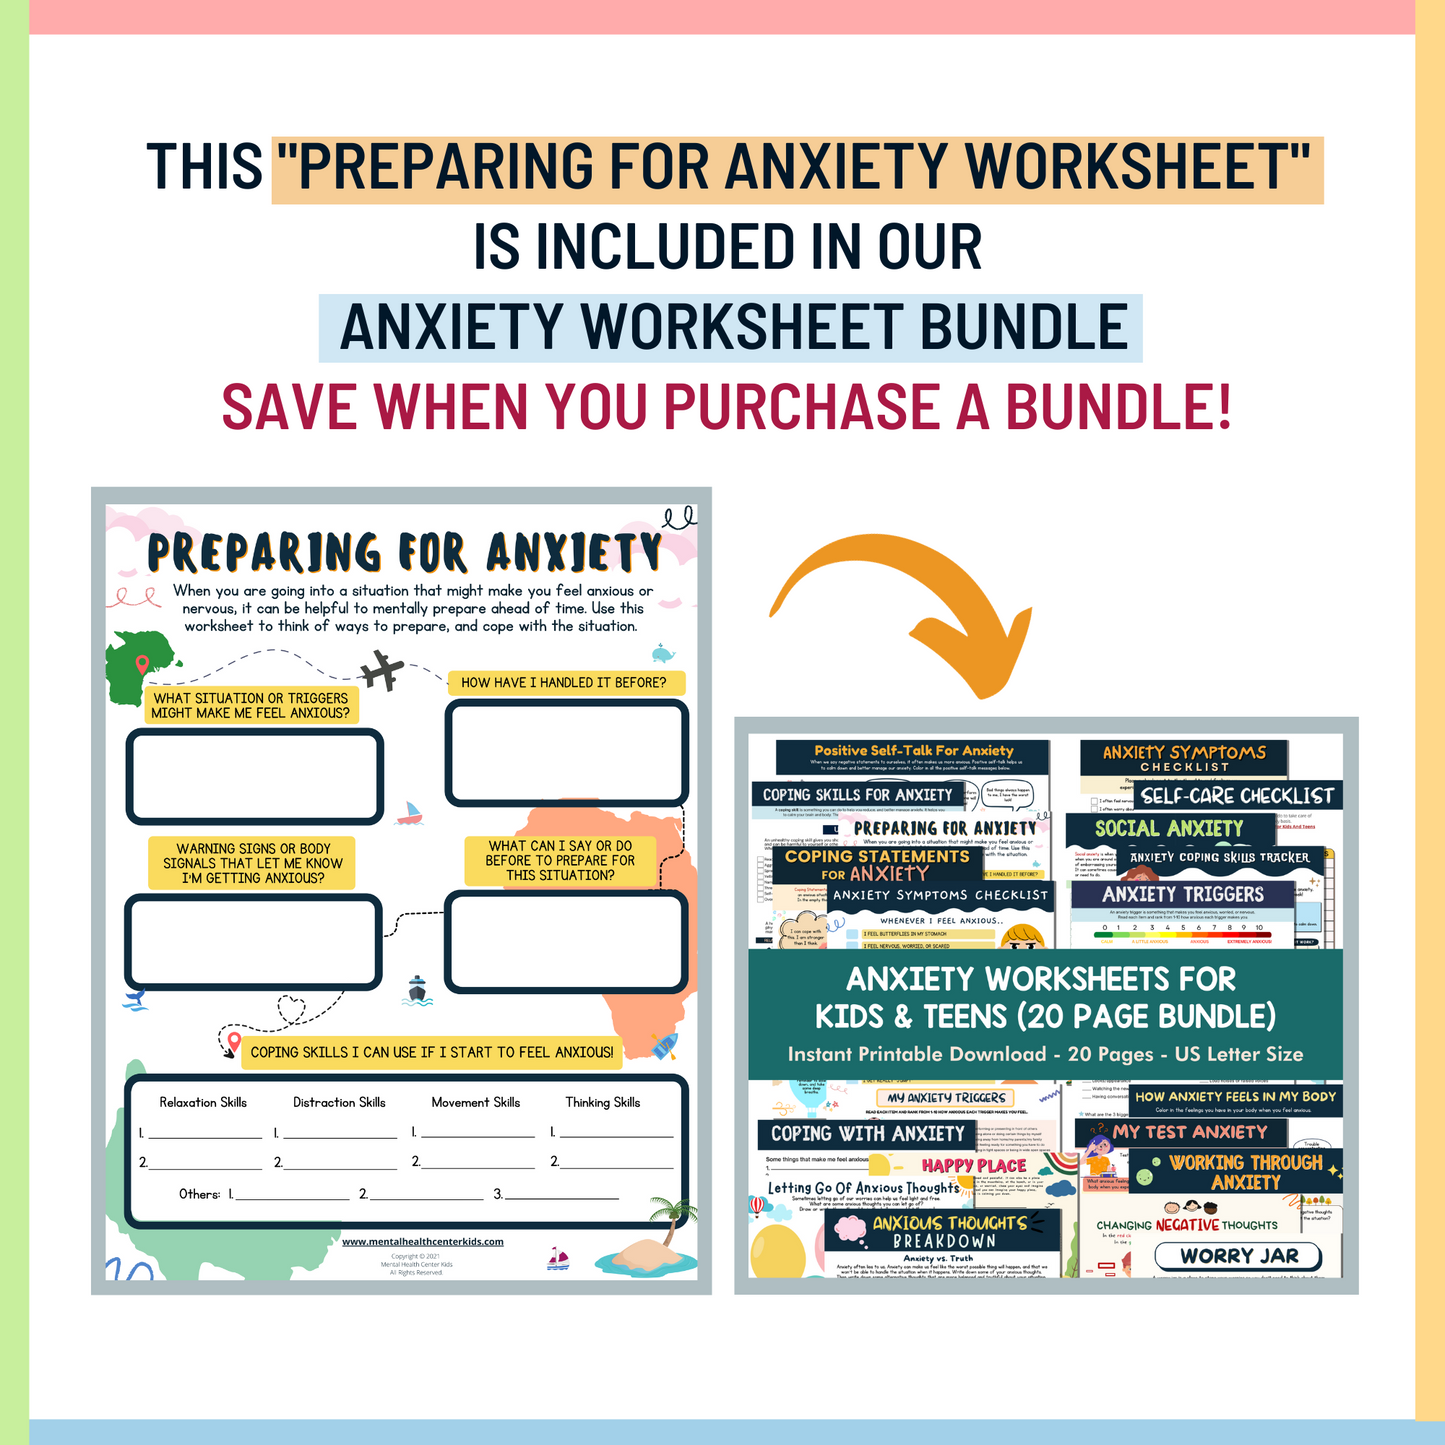 Preparing for Anxiety